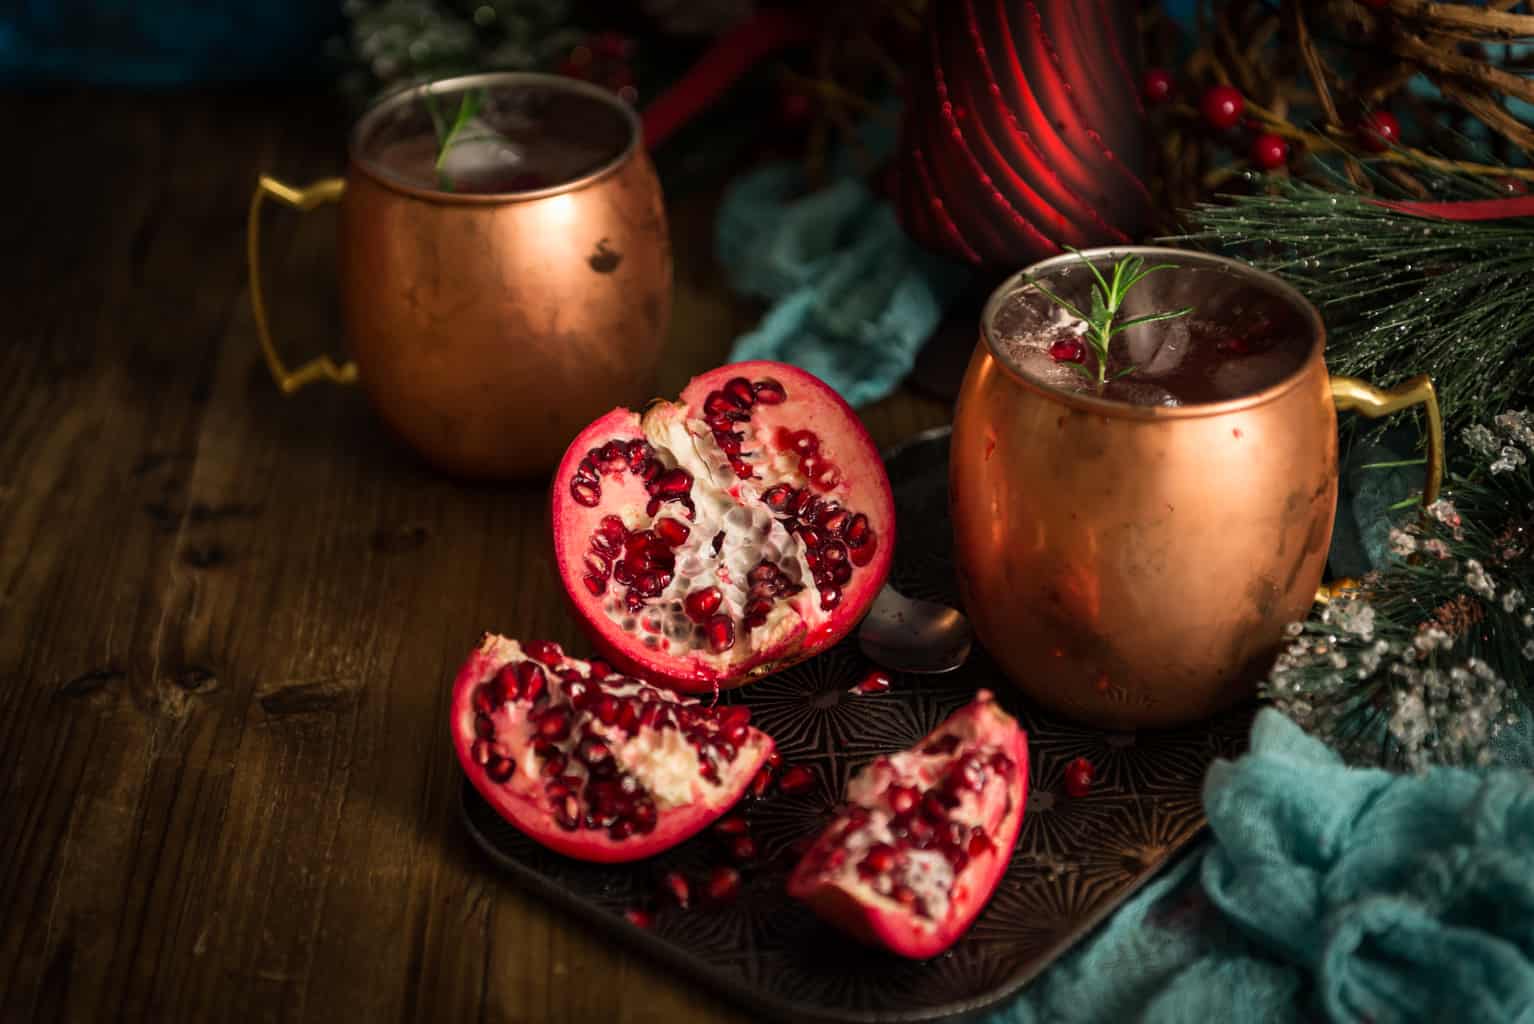 pomegranate moscow mule cocktail recipe by kita roberts on passtheushi